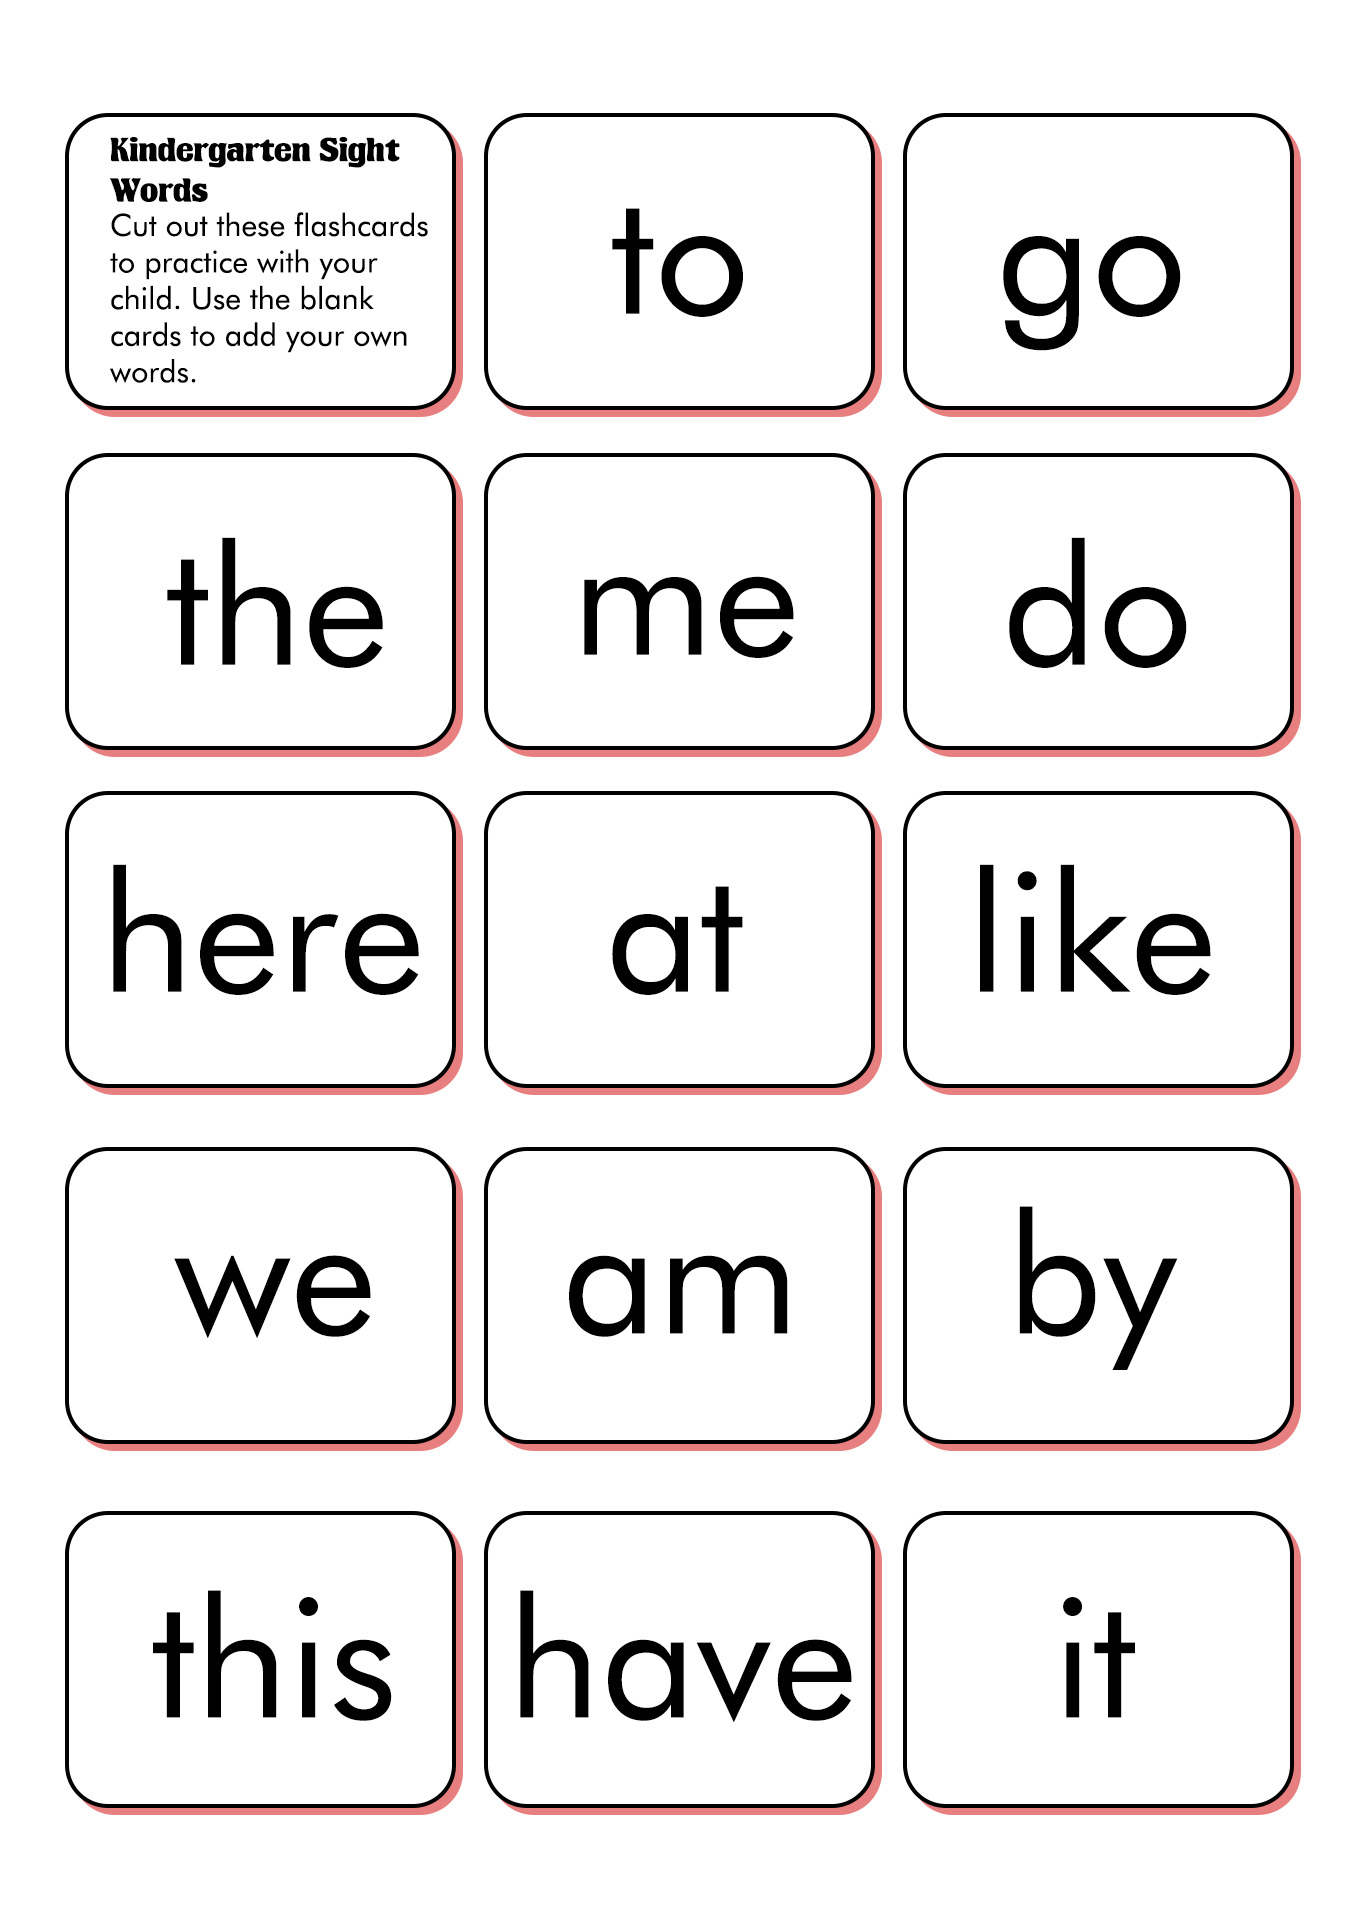 14-best-images-of-first-100-sight-words-printable-worksheets-first-grade-sight-word-list